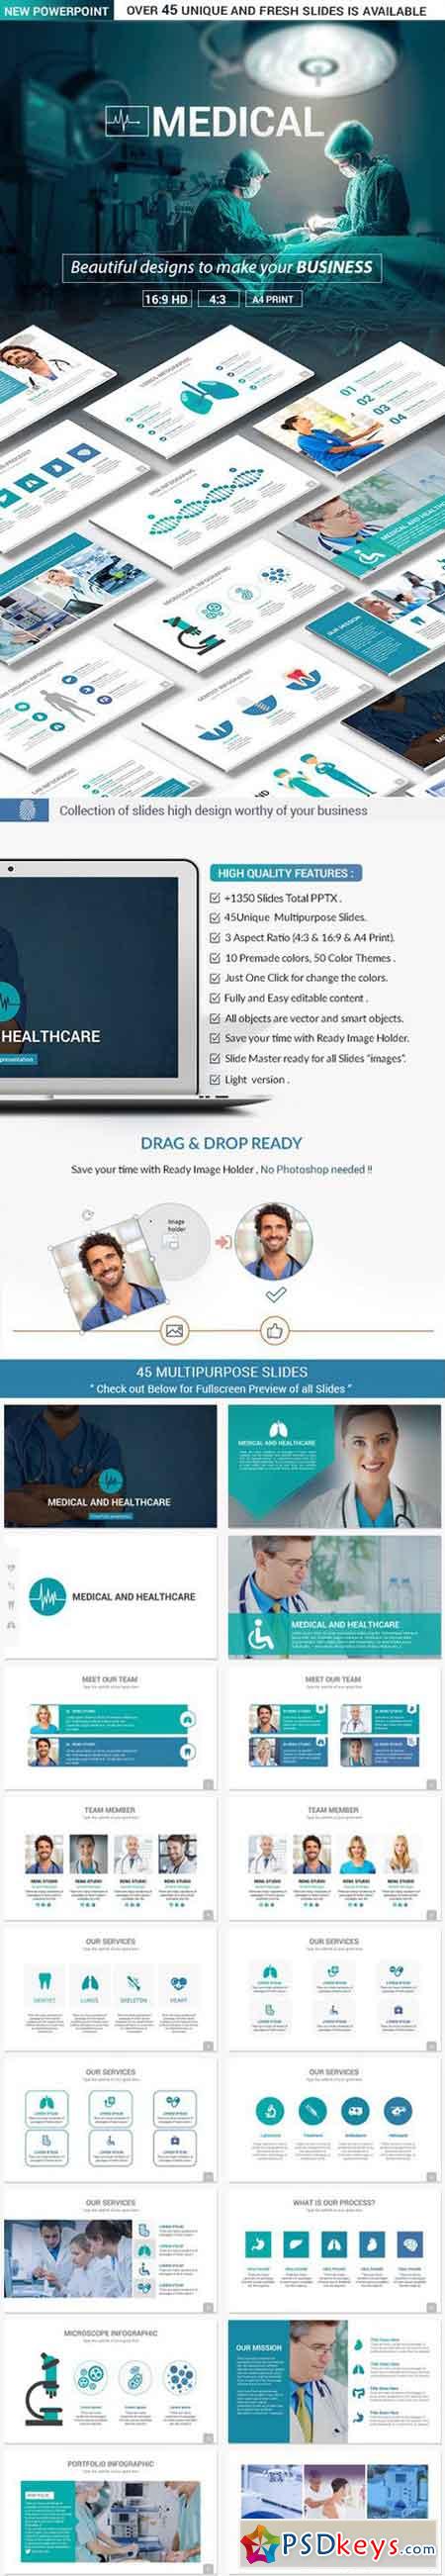 Medical Powerpoint Presentation Template 19411940